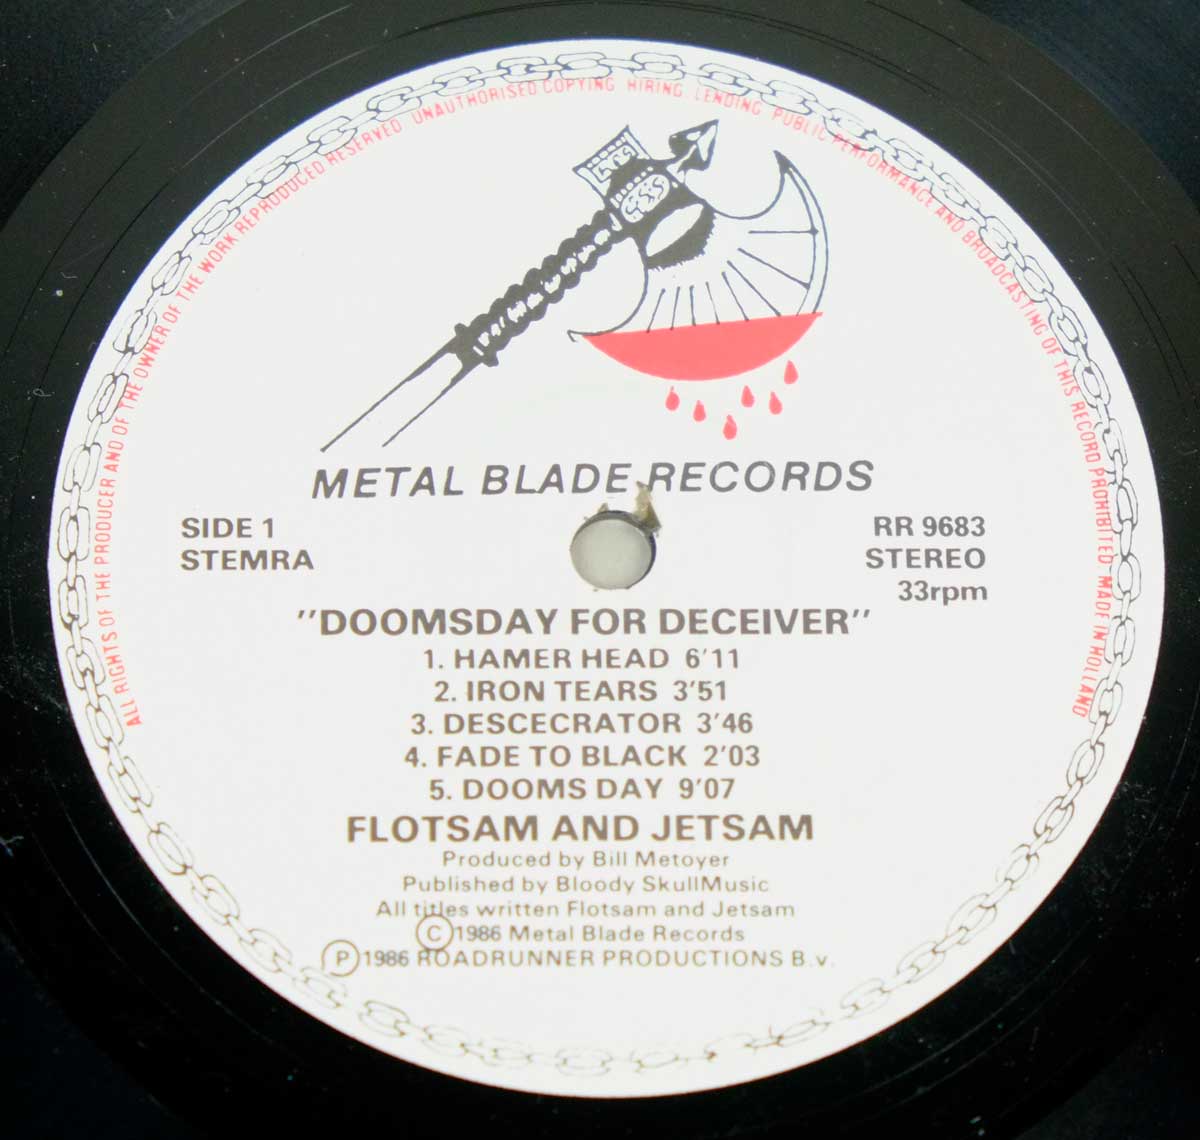 Enlarged High Resolution Photo of the Record's label FLOTSAM AND JETSAM - Doomsday For The Deceiver https://vinyl-records.nl